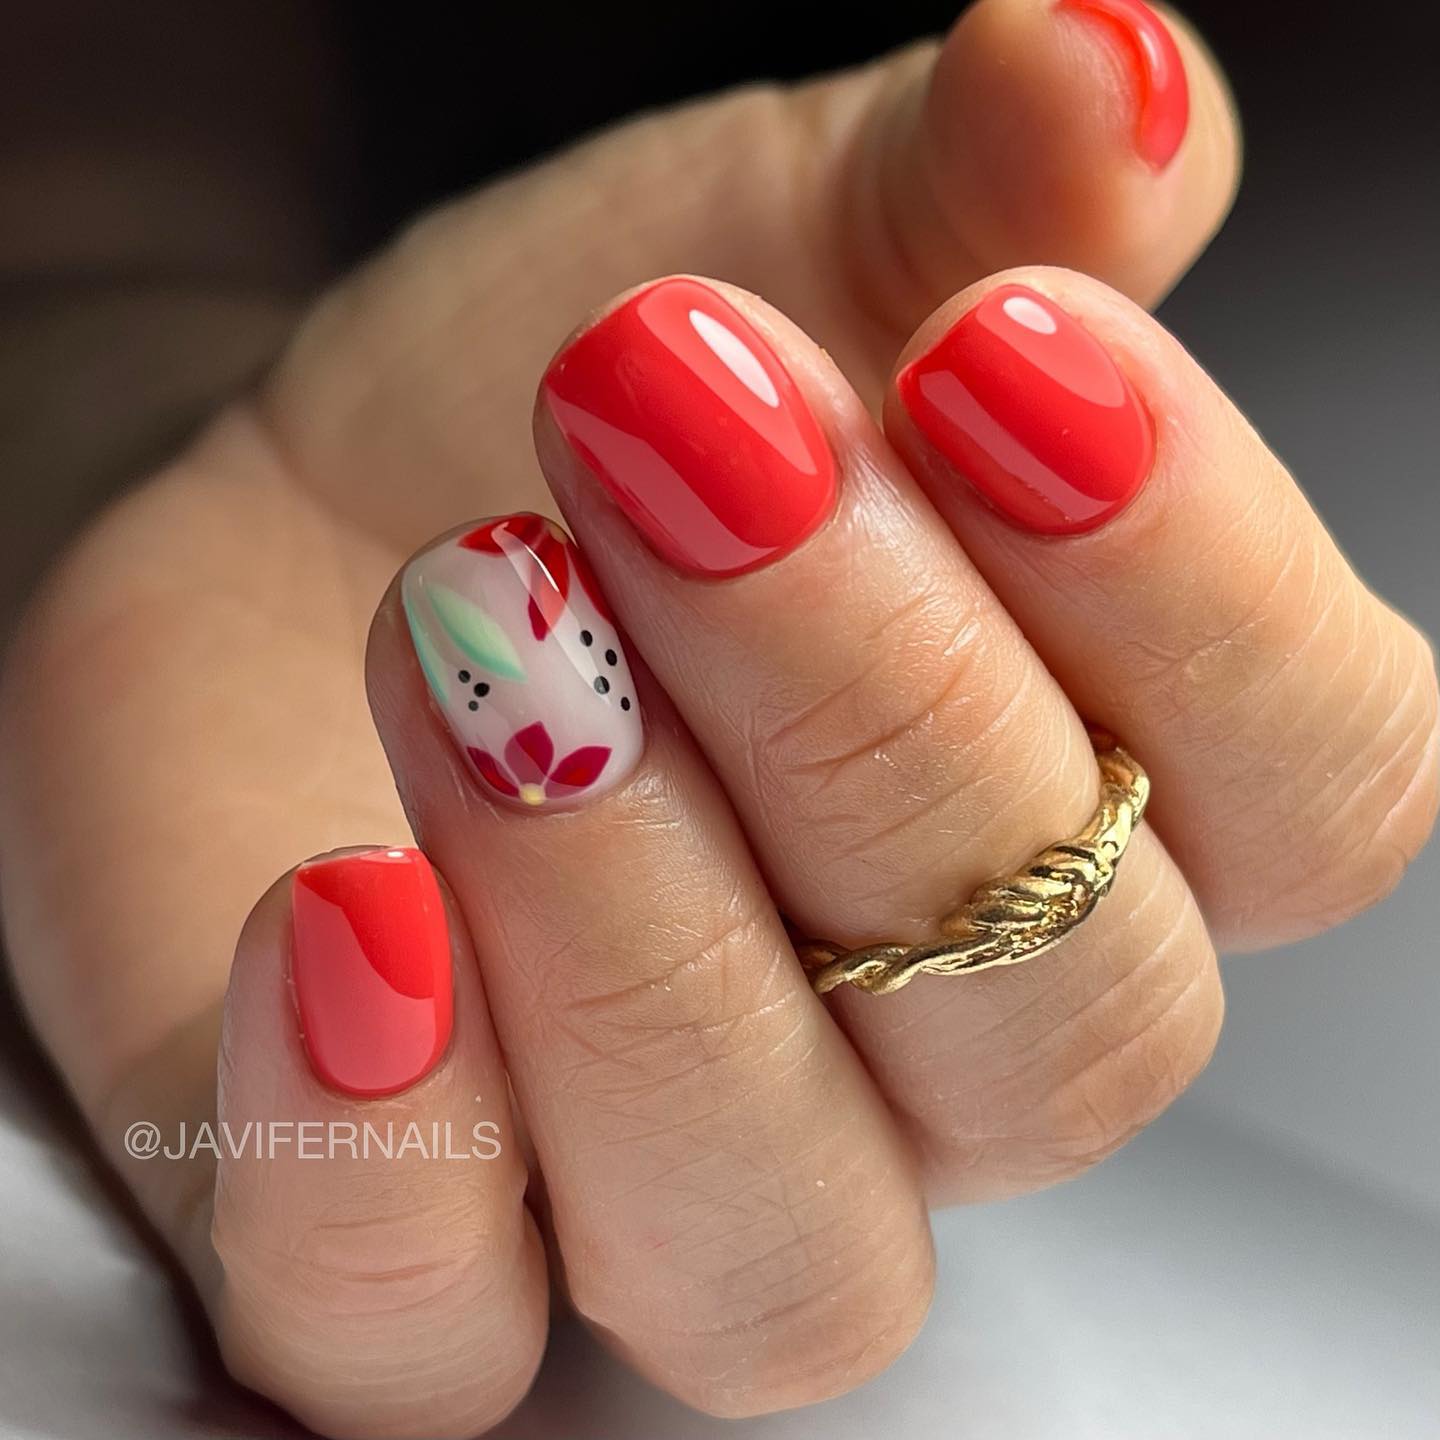 100+ Short Nail Designs You’ll Want To Try This Year images 18